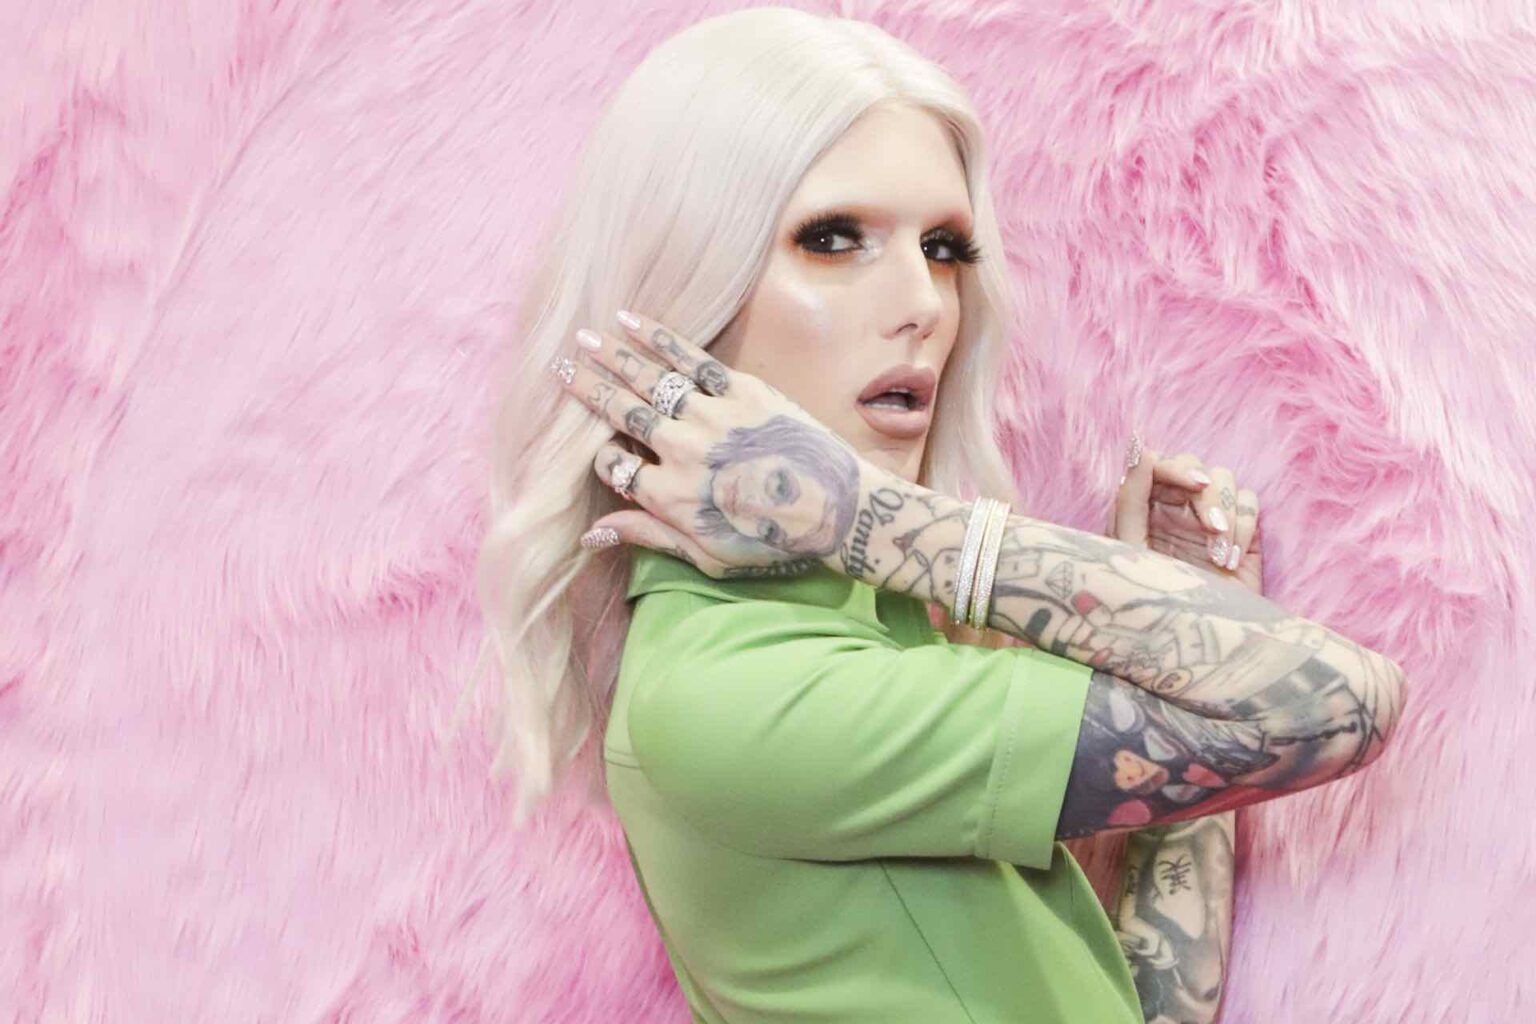 To be specific, the internet’s now digging the archives for Jeffree Star to get the receipts from Twitter and other places. Here's what we know.